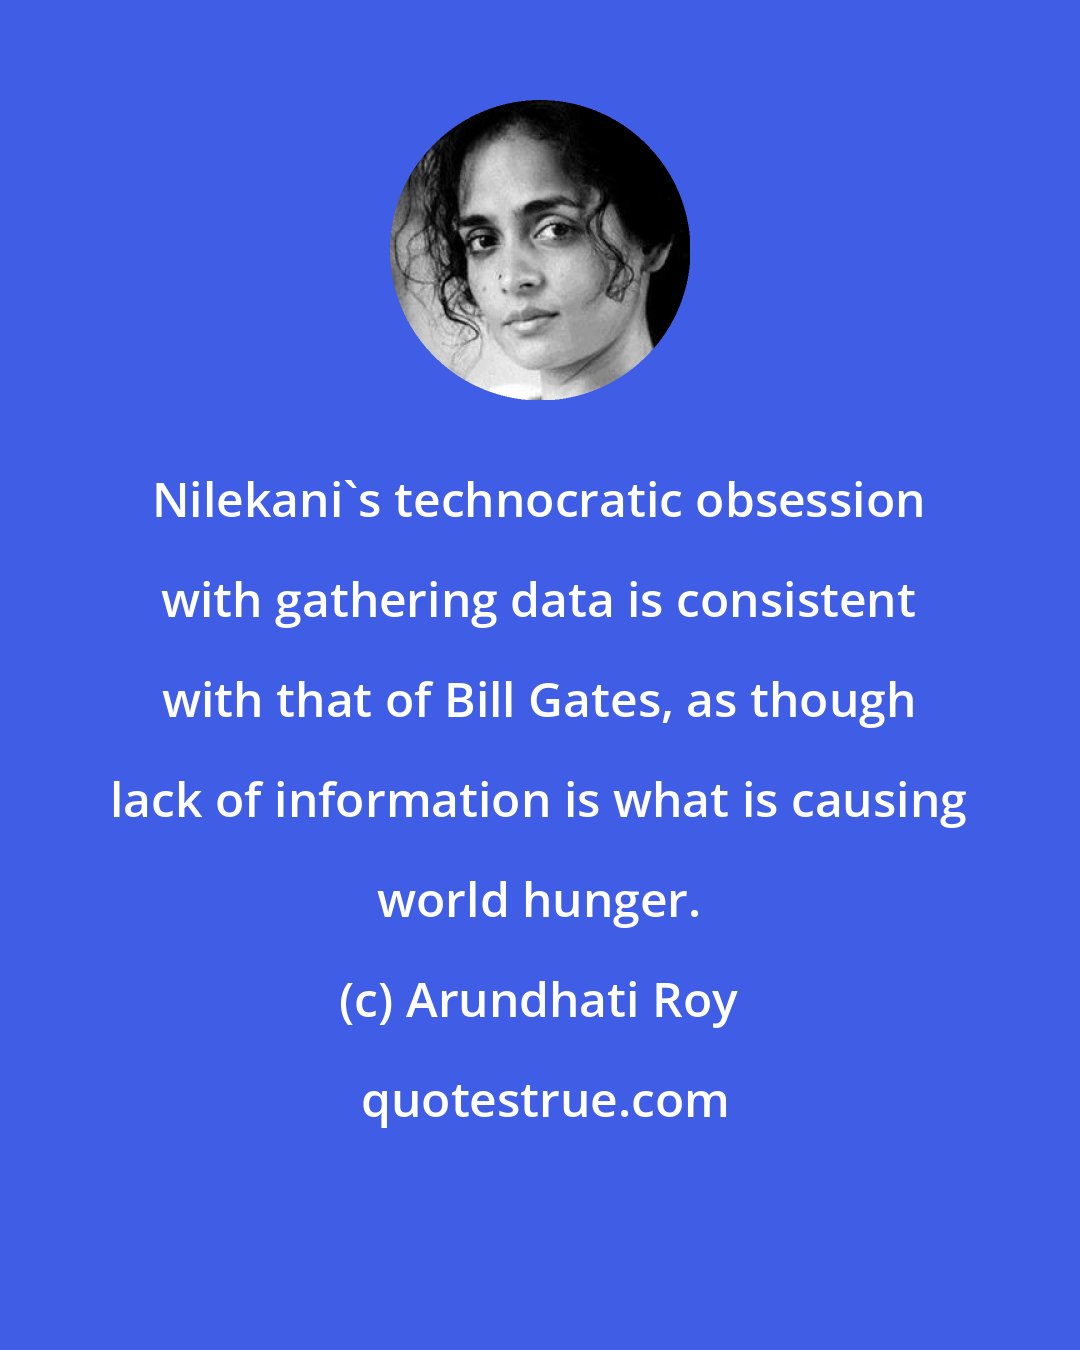 Arundhati Roy: Nilekani's technocratic obsession with gathering data is consistent with that of Bill Gates, as though lack of information is what is causing world hunger.